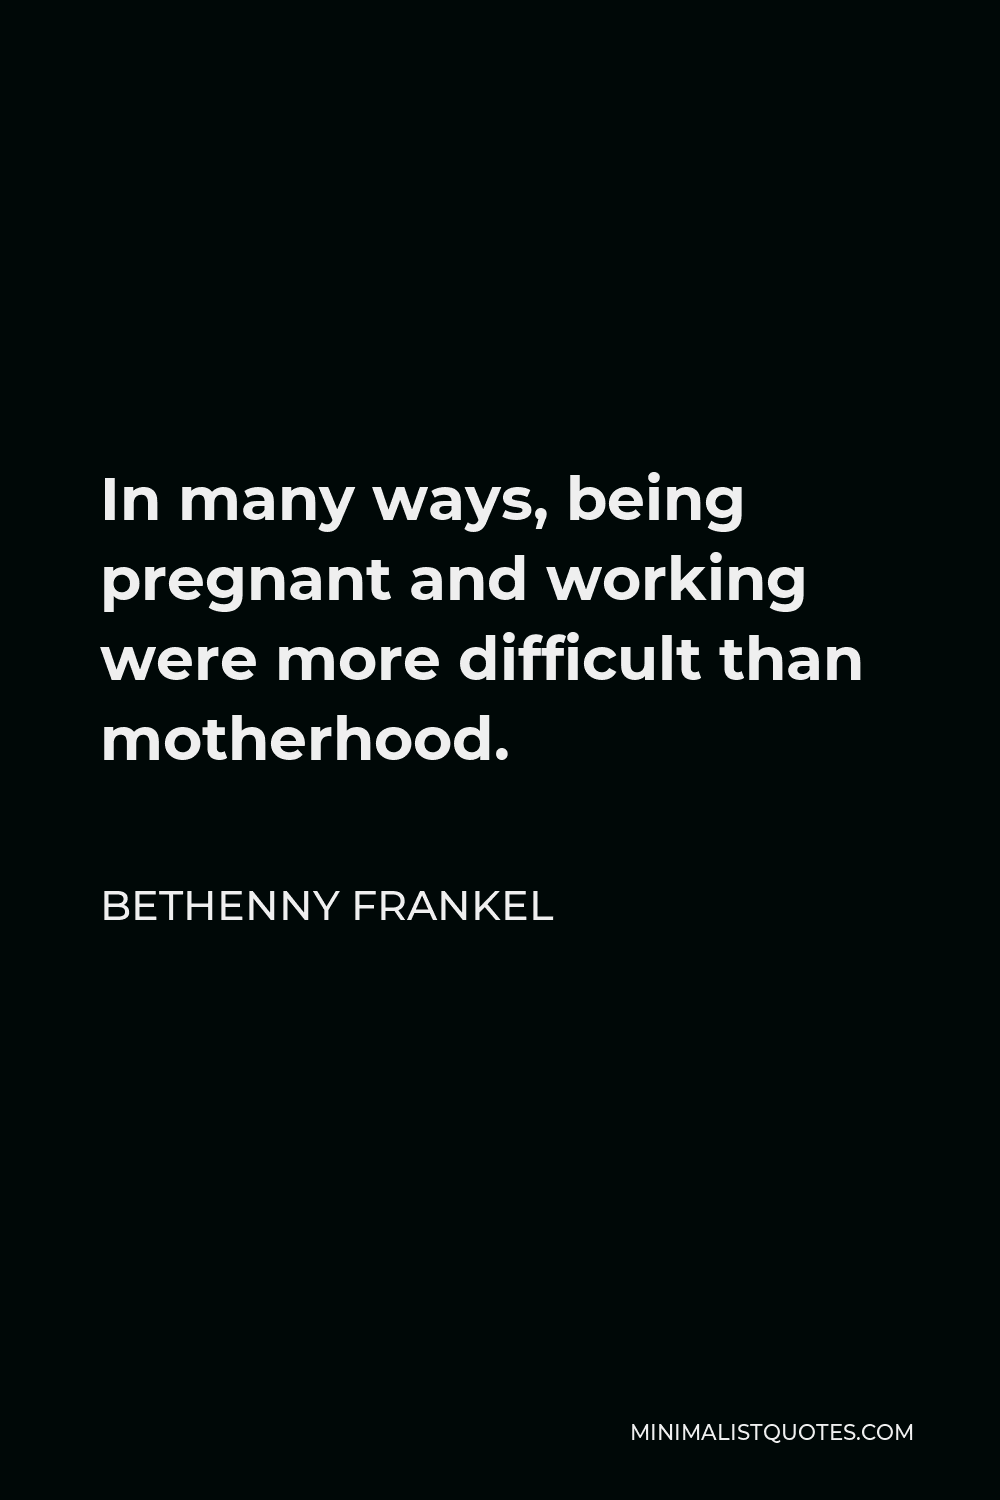 Bethenny Frankel Quote - In many ways, being pregnant and working were more difficult than motherhood.